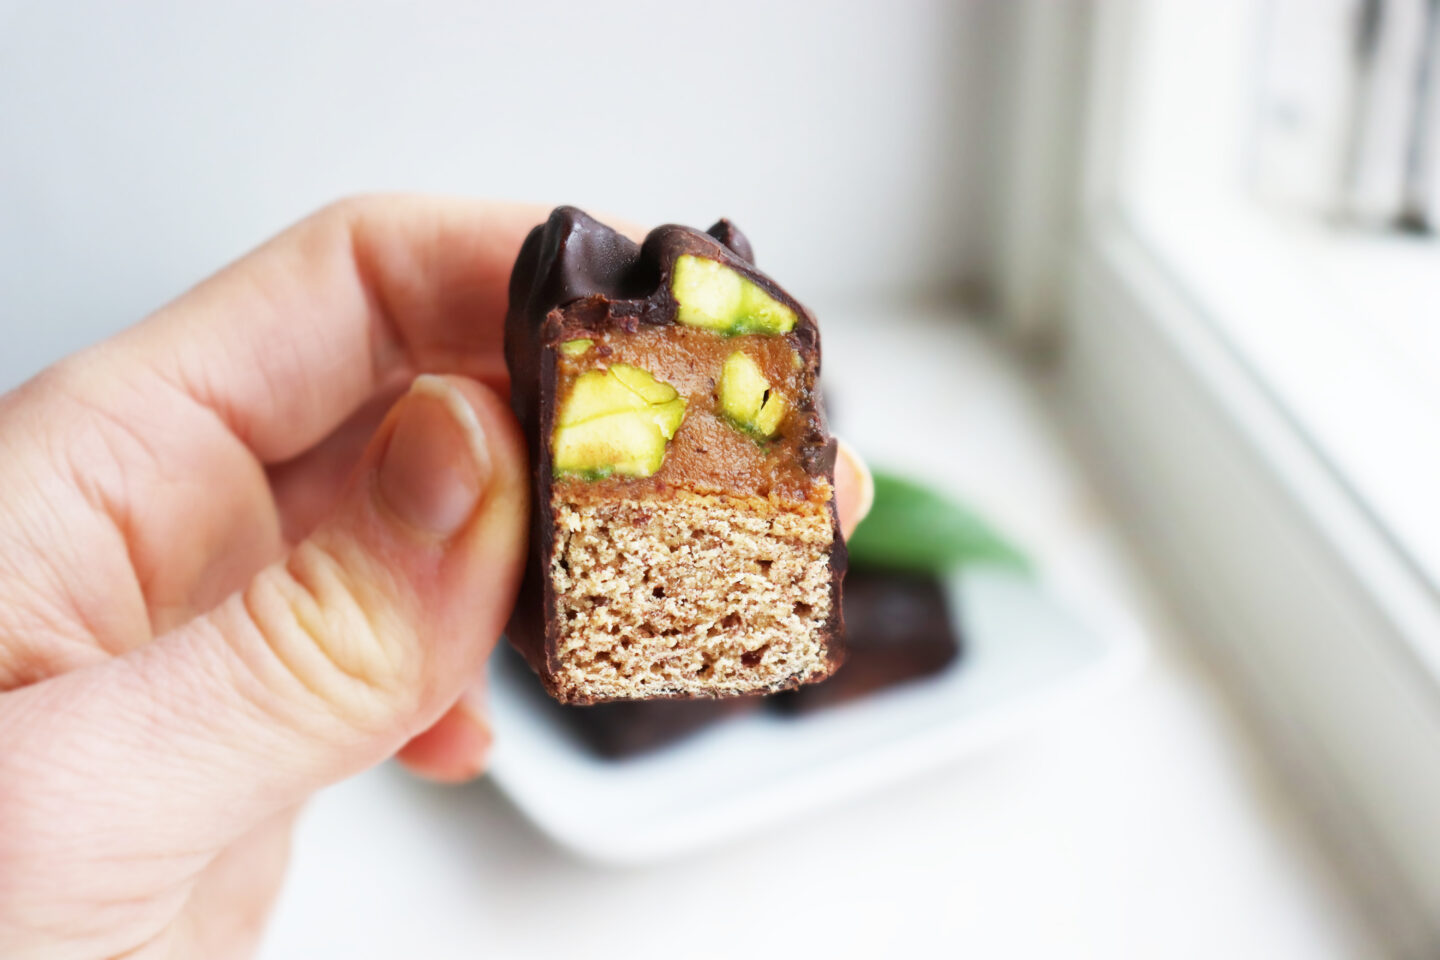 Snickers with a hidden veggie